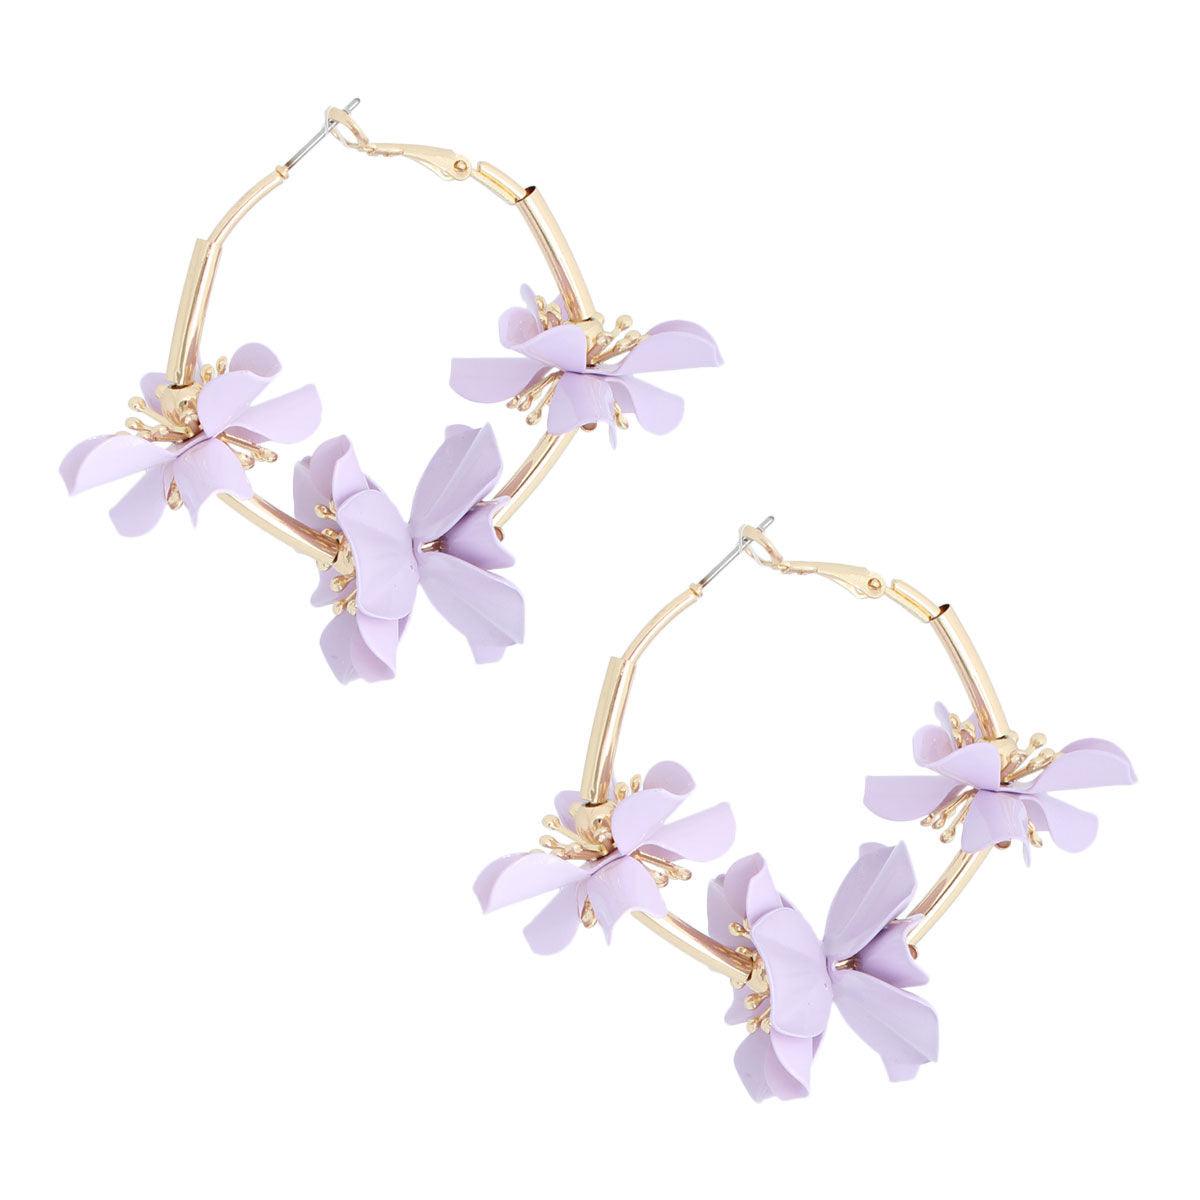 Get Noticed with Our Stunning Purple Flower Earrings